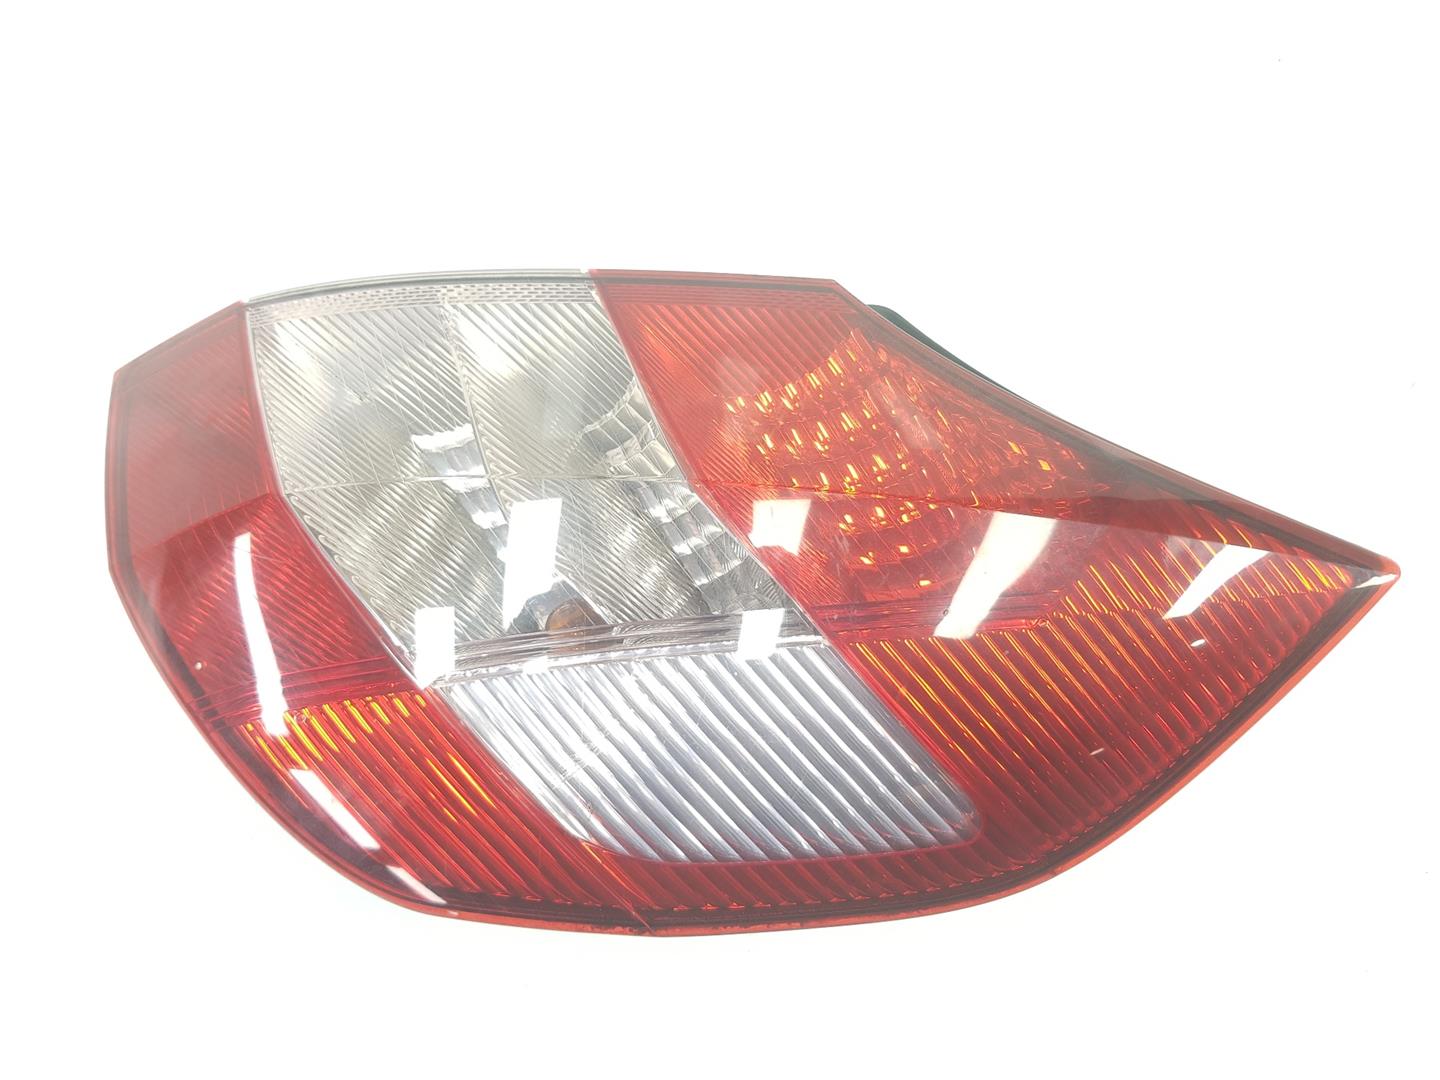 RENAULT Scenic 2 generation (2003-2010) Rear Right Taillight Lamp 8200127702, 8200127702 21675739